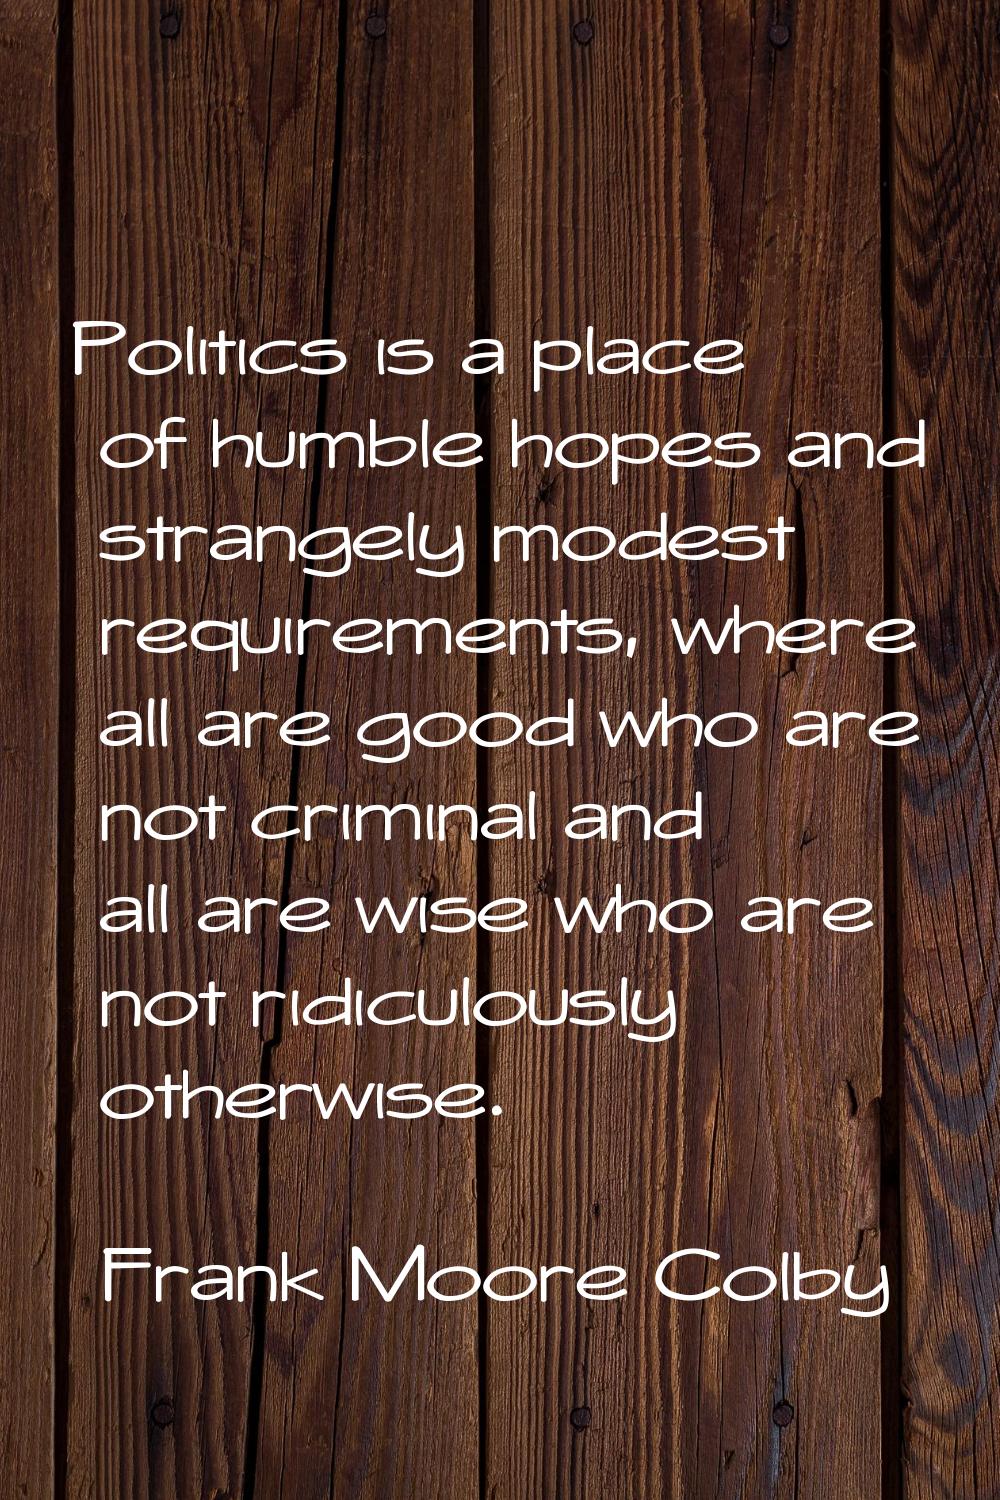 Politics is a place of humble hopes and strangely modest requirements, where all are good who are n